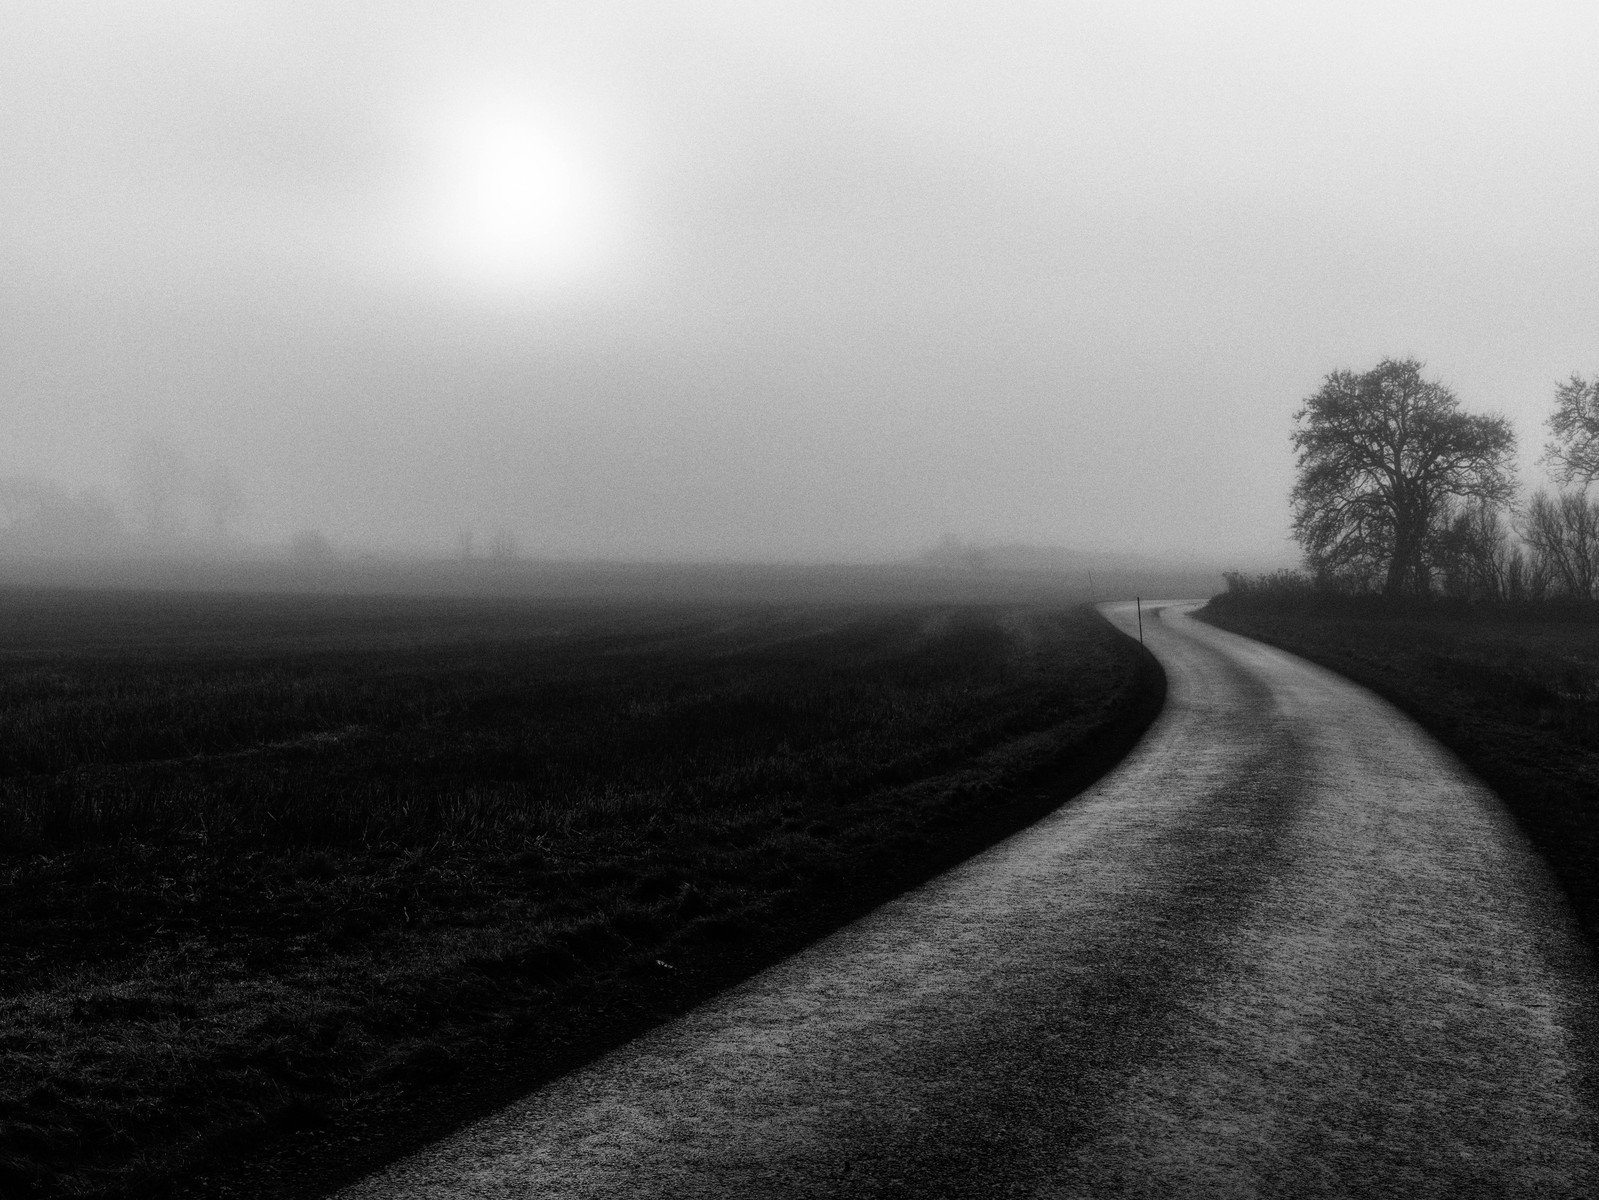 Väg som försvinner in i extrem dimma / A road that disappears into extreme fog